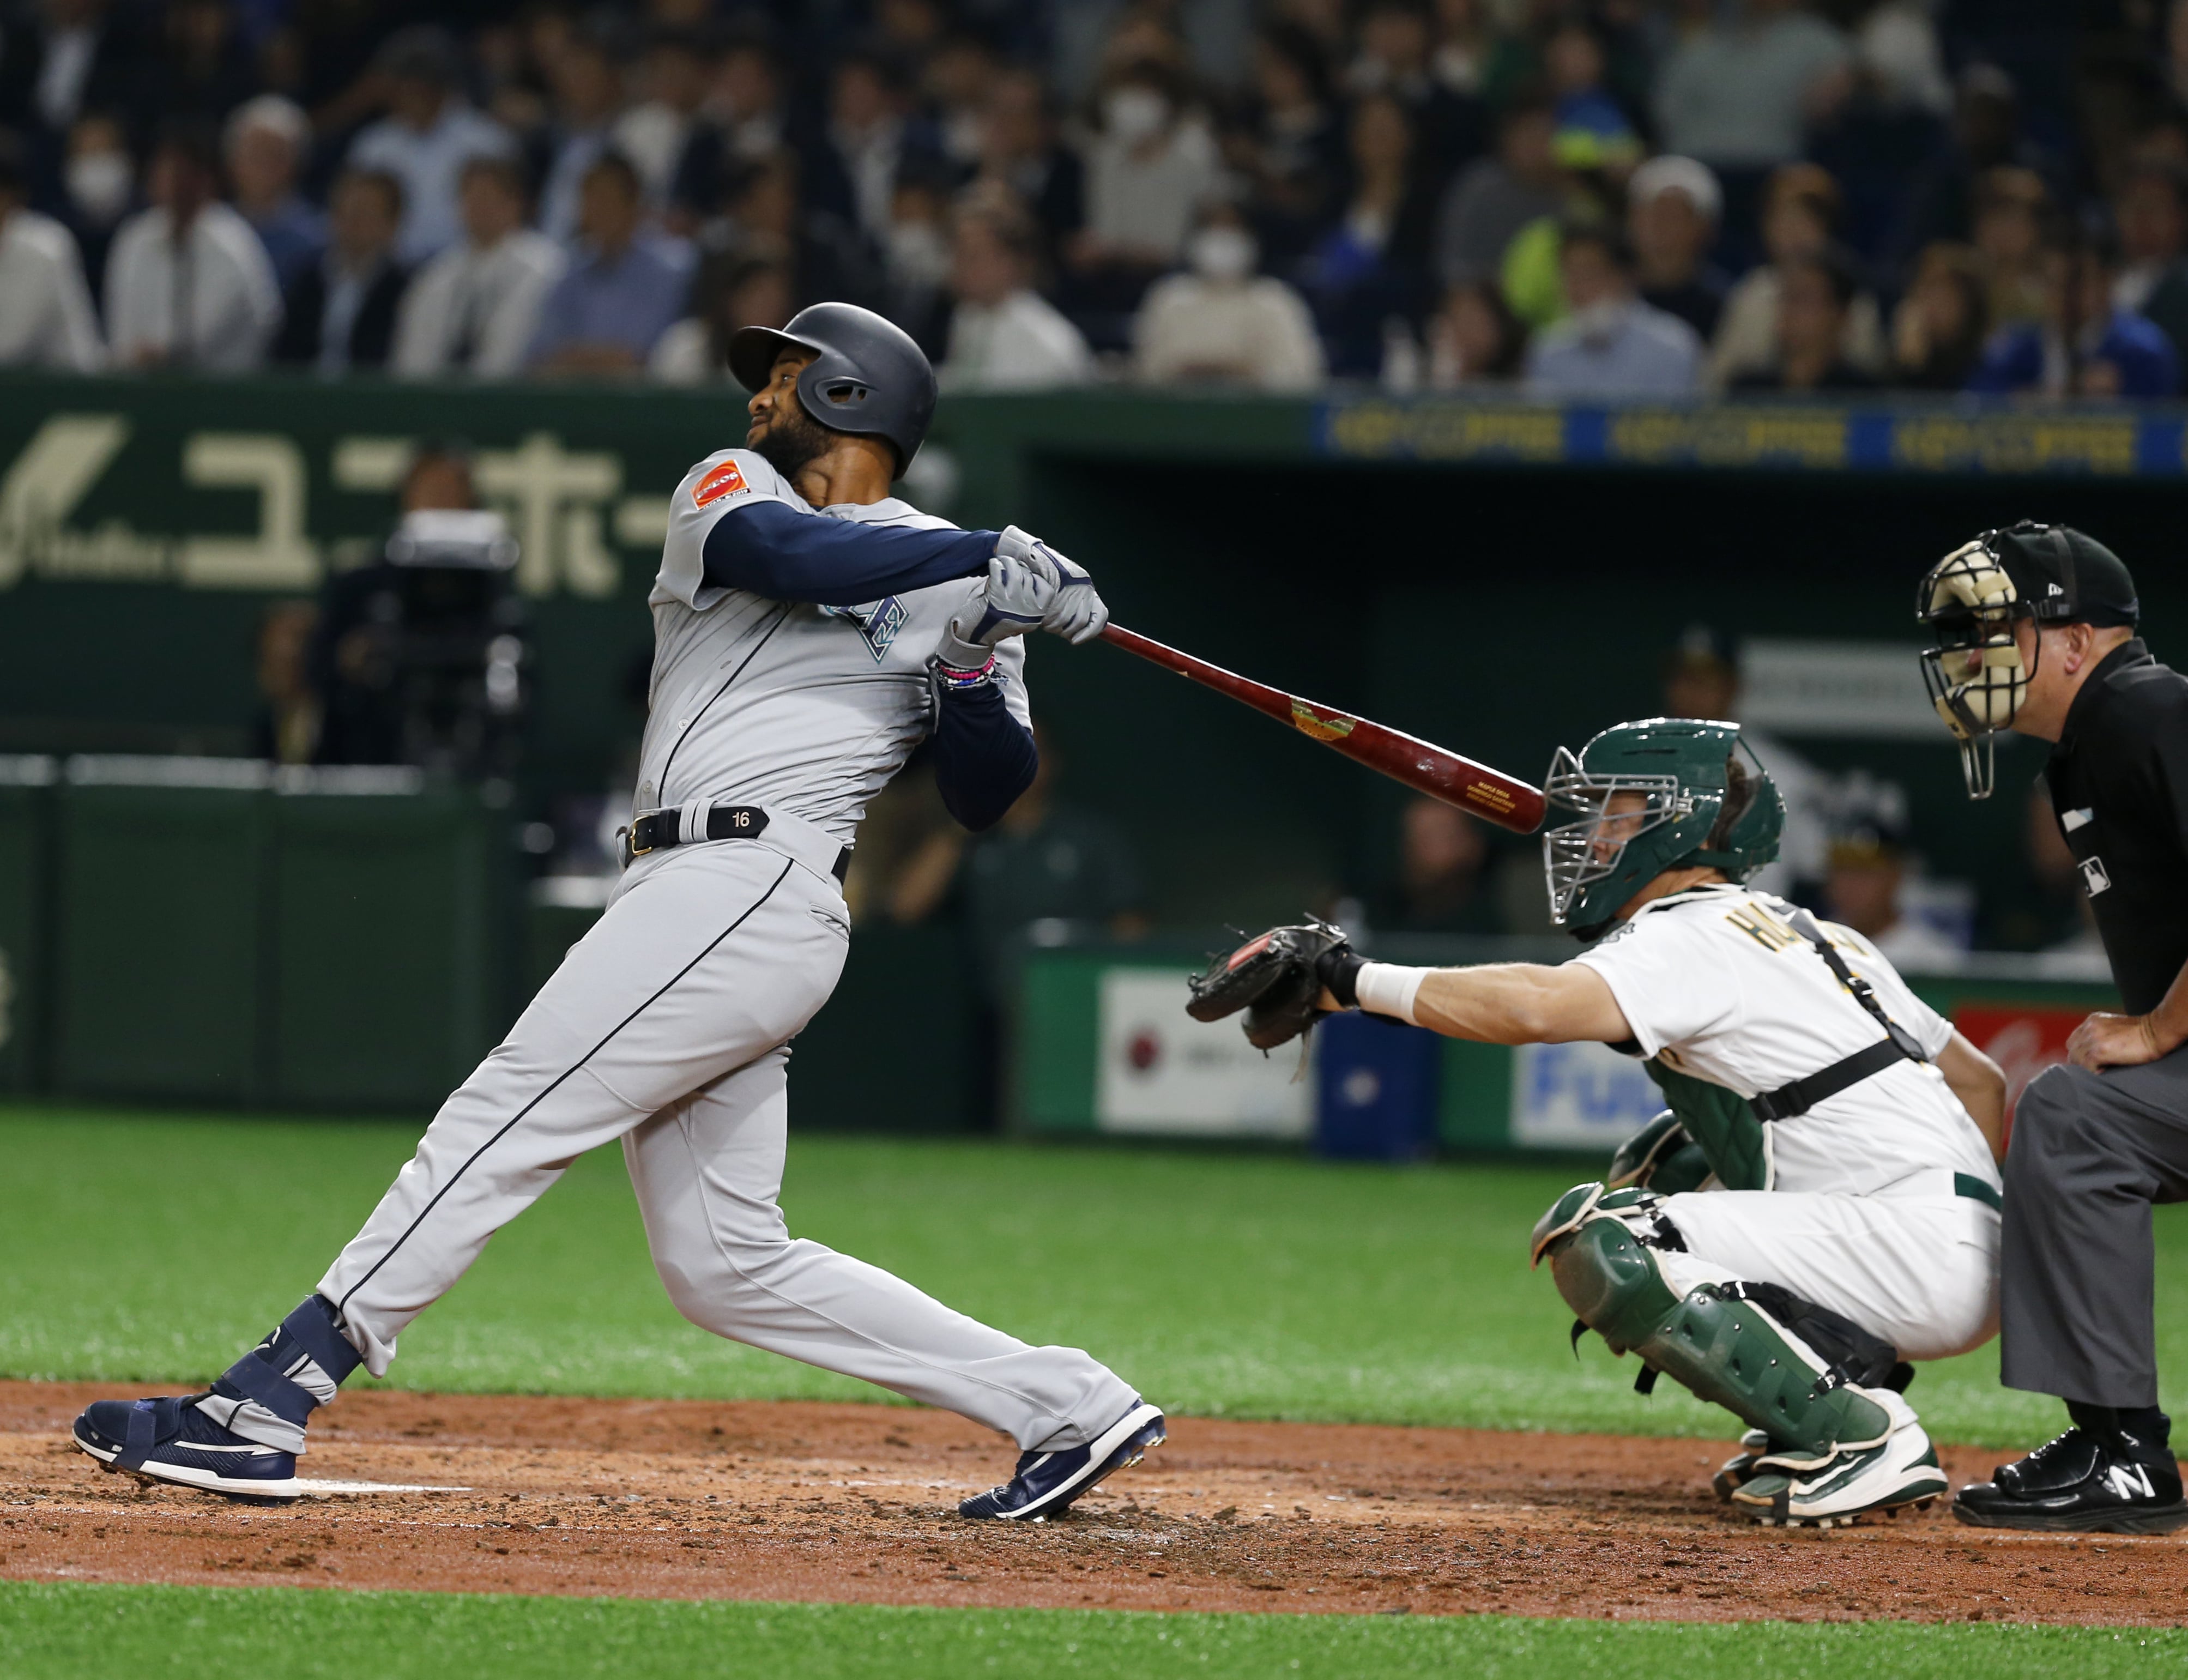 Seattle Mariners' Domingo Santana hits a grand slam off Oakland Athletics starter Mike Fiers in the third inning of Game 1 of their Major League opening series baseball game at Tokyo Dome in Tokyo, Wednesday, March 20, 2019. Athletics catcher is catcher Nick Hundley.